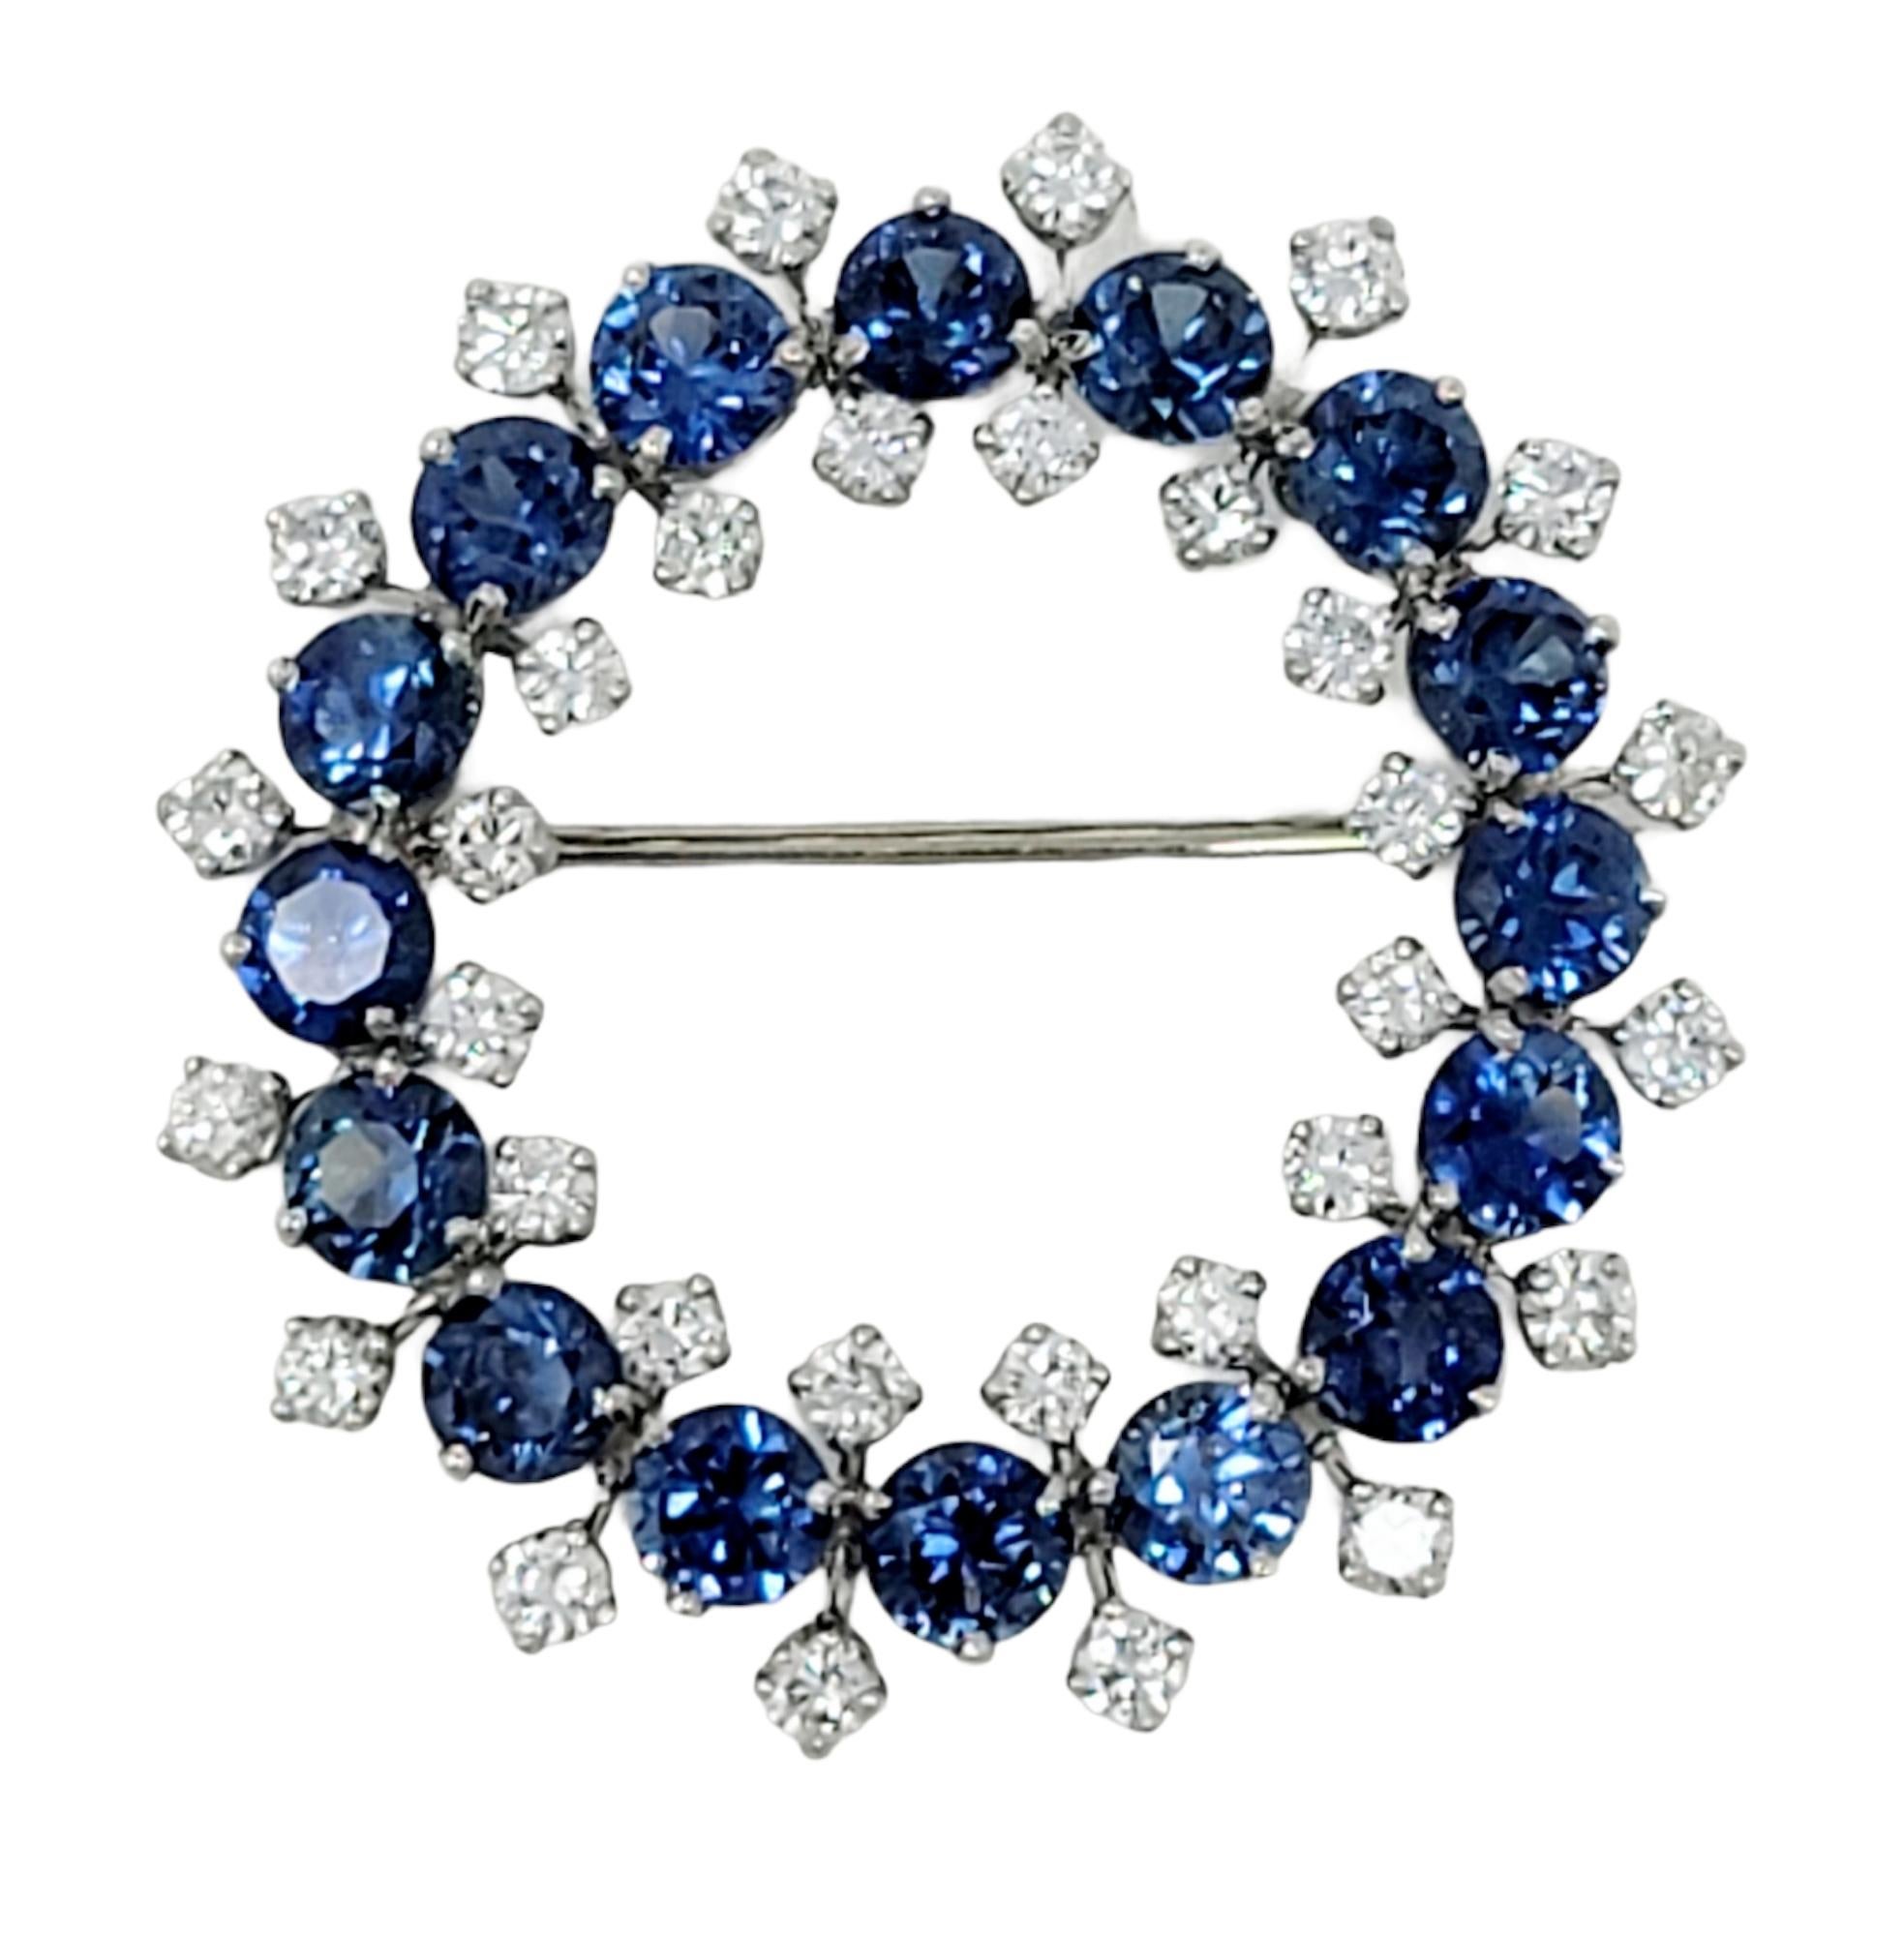 Exquisite blue sapphire and diamond brooch bursting with sparkle. Pair on a scarf, sweater, jacket or bag for an undeniably glamorous touch. This gorgeous brooch features 18 round cut natural blue sapphire stones prong set in an open circle design